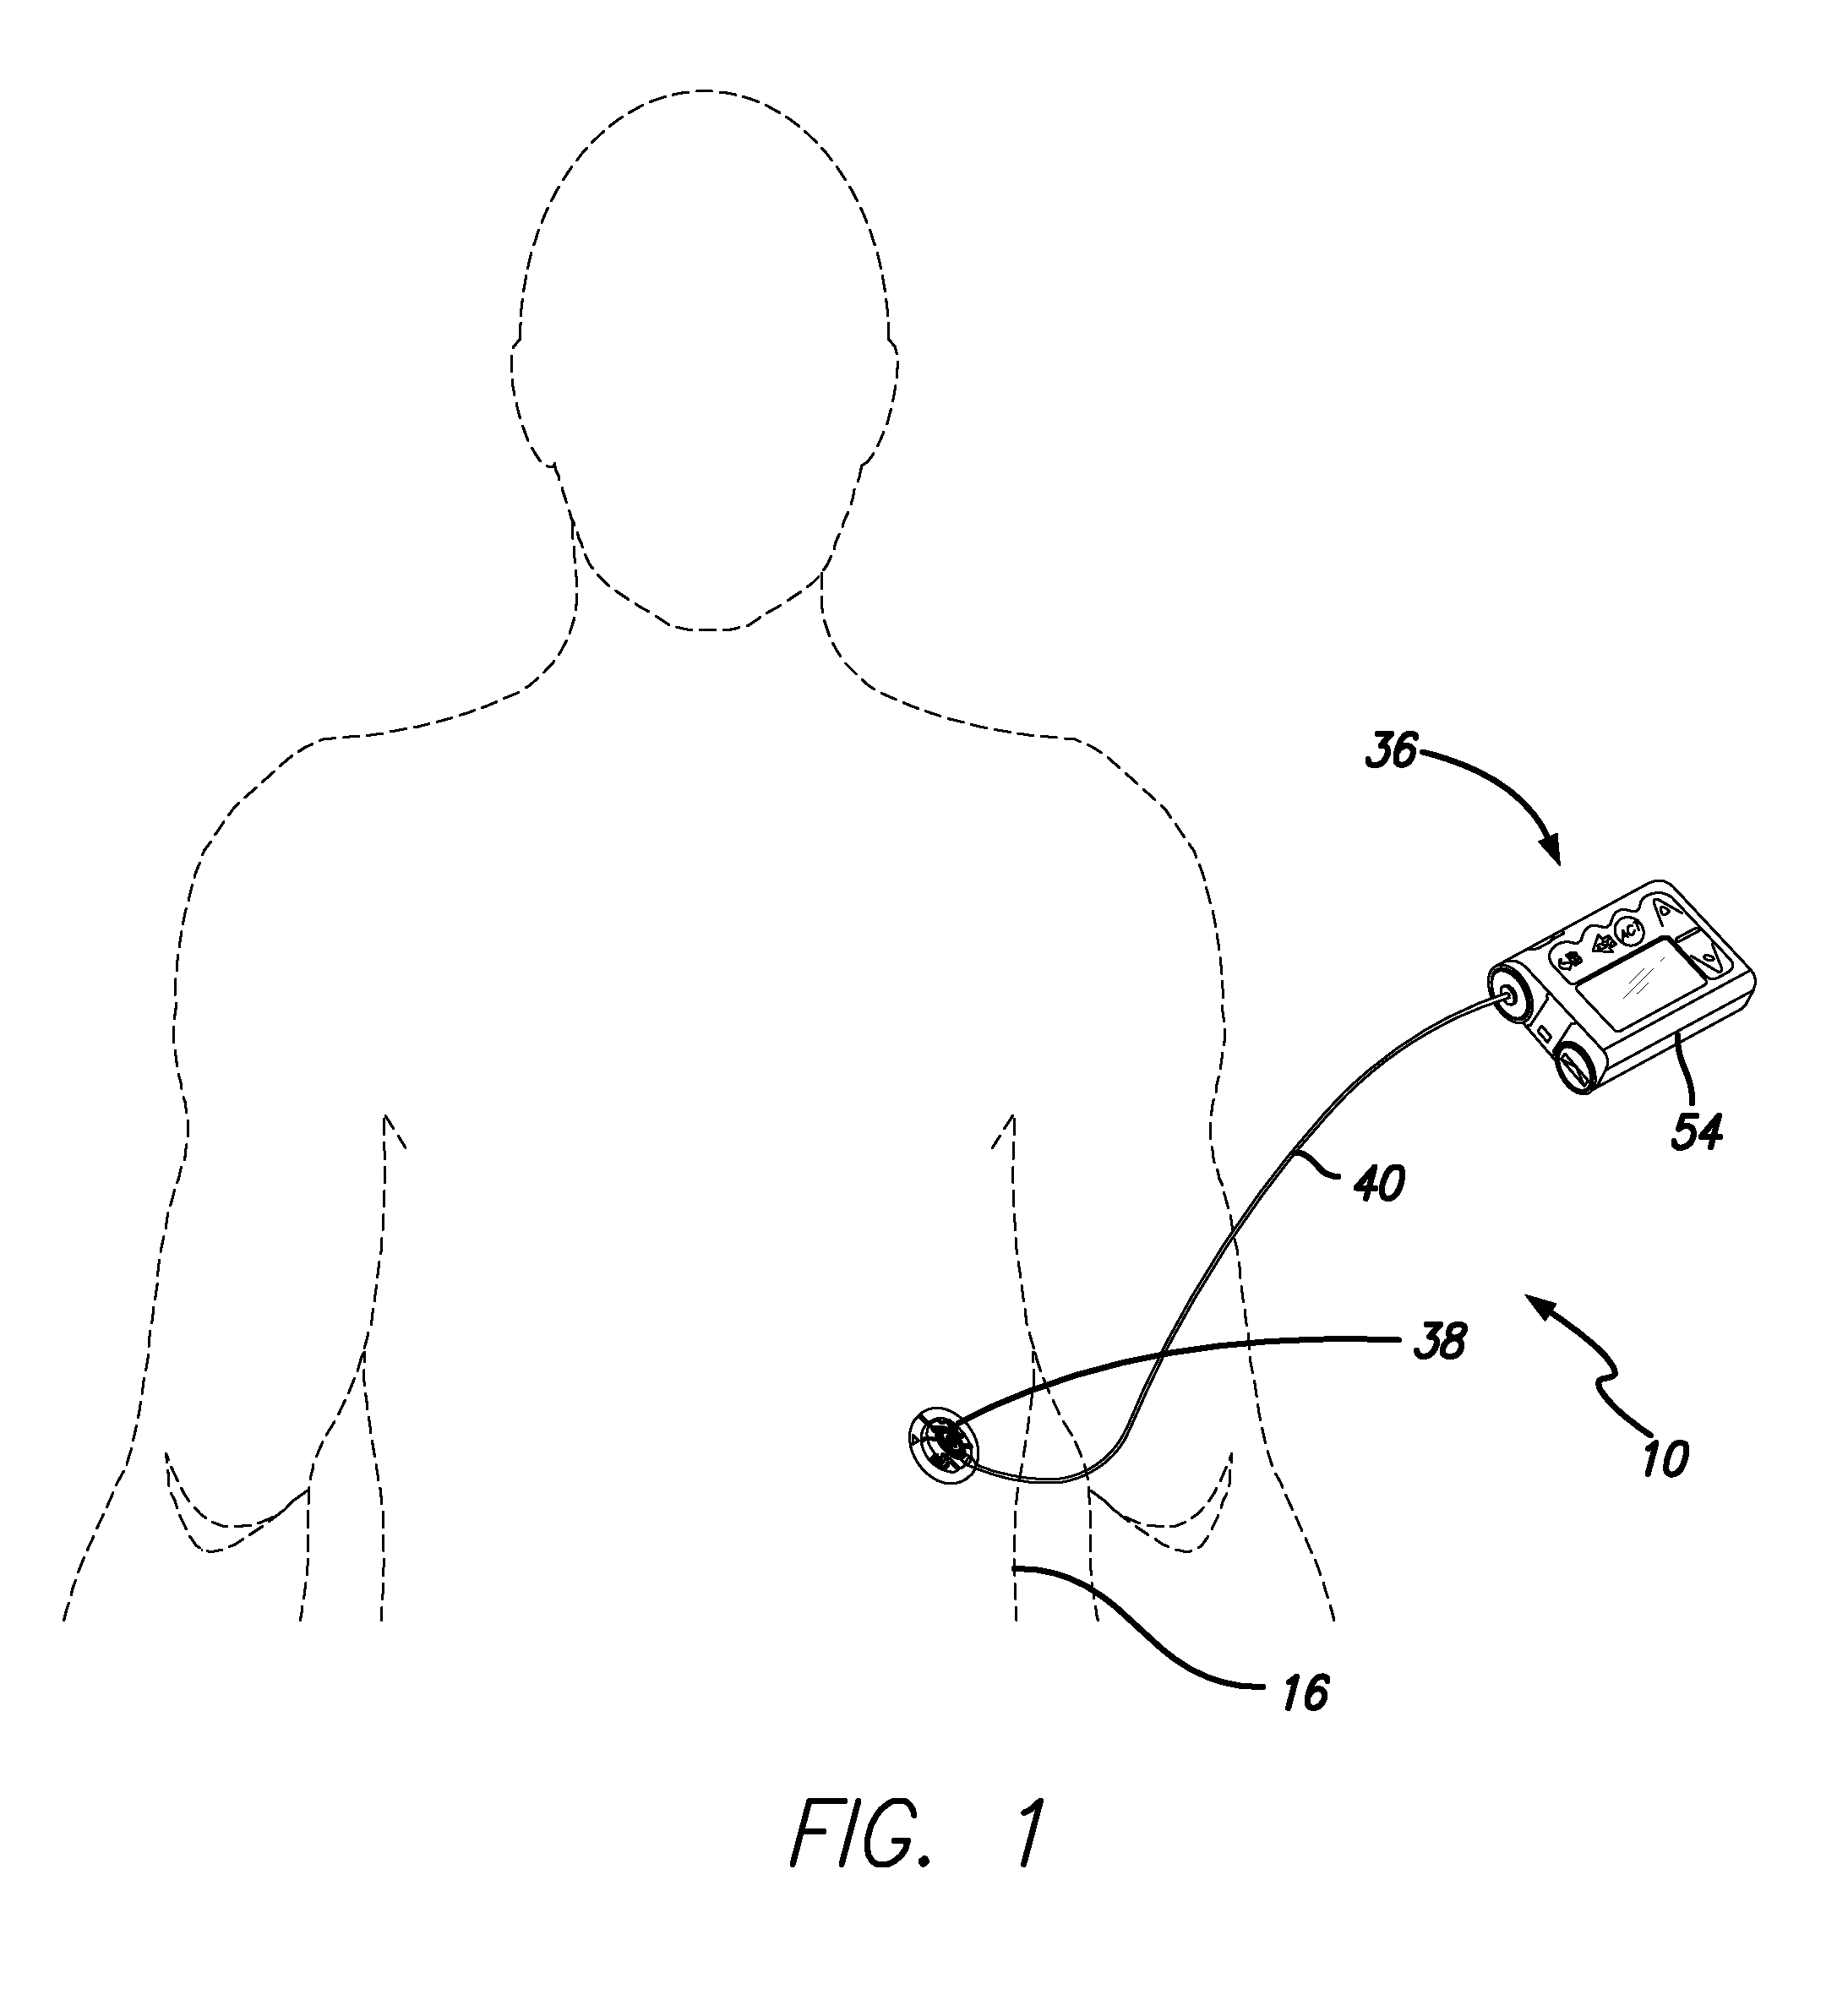 Priming detection system and method of using the same